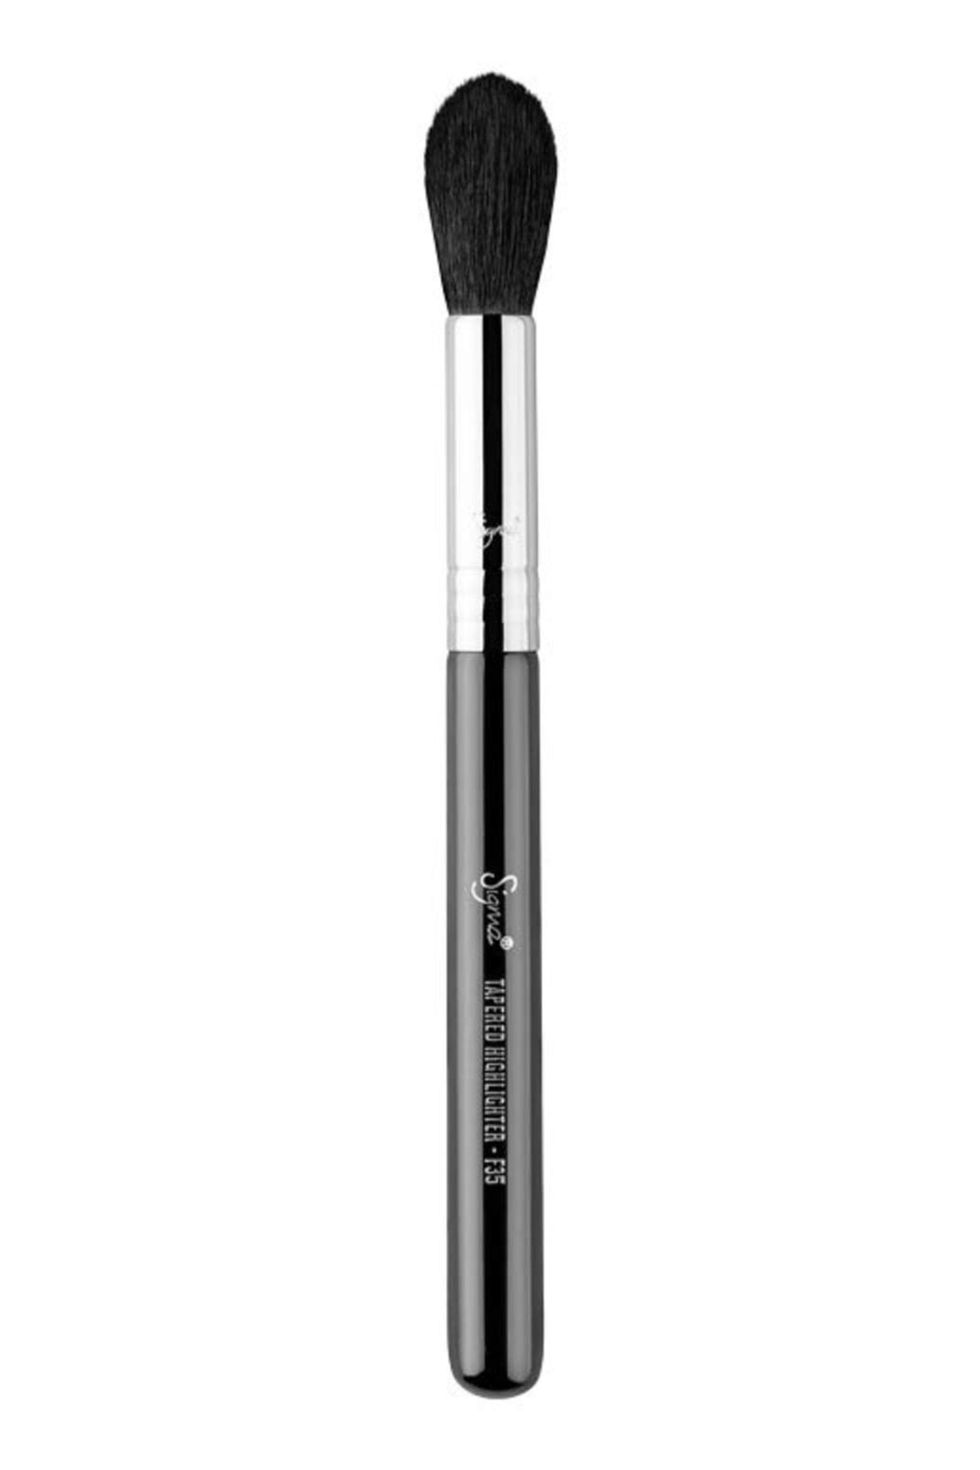 Sigma Beauty F35 Tapered Highlighter Brush